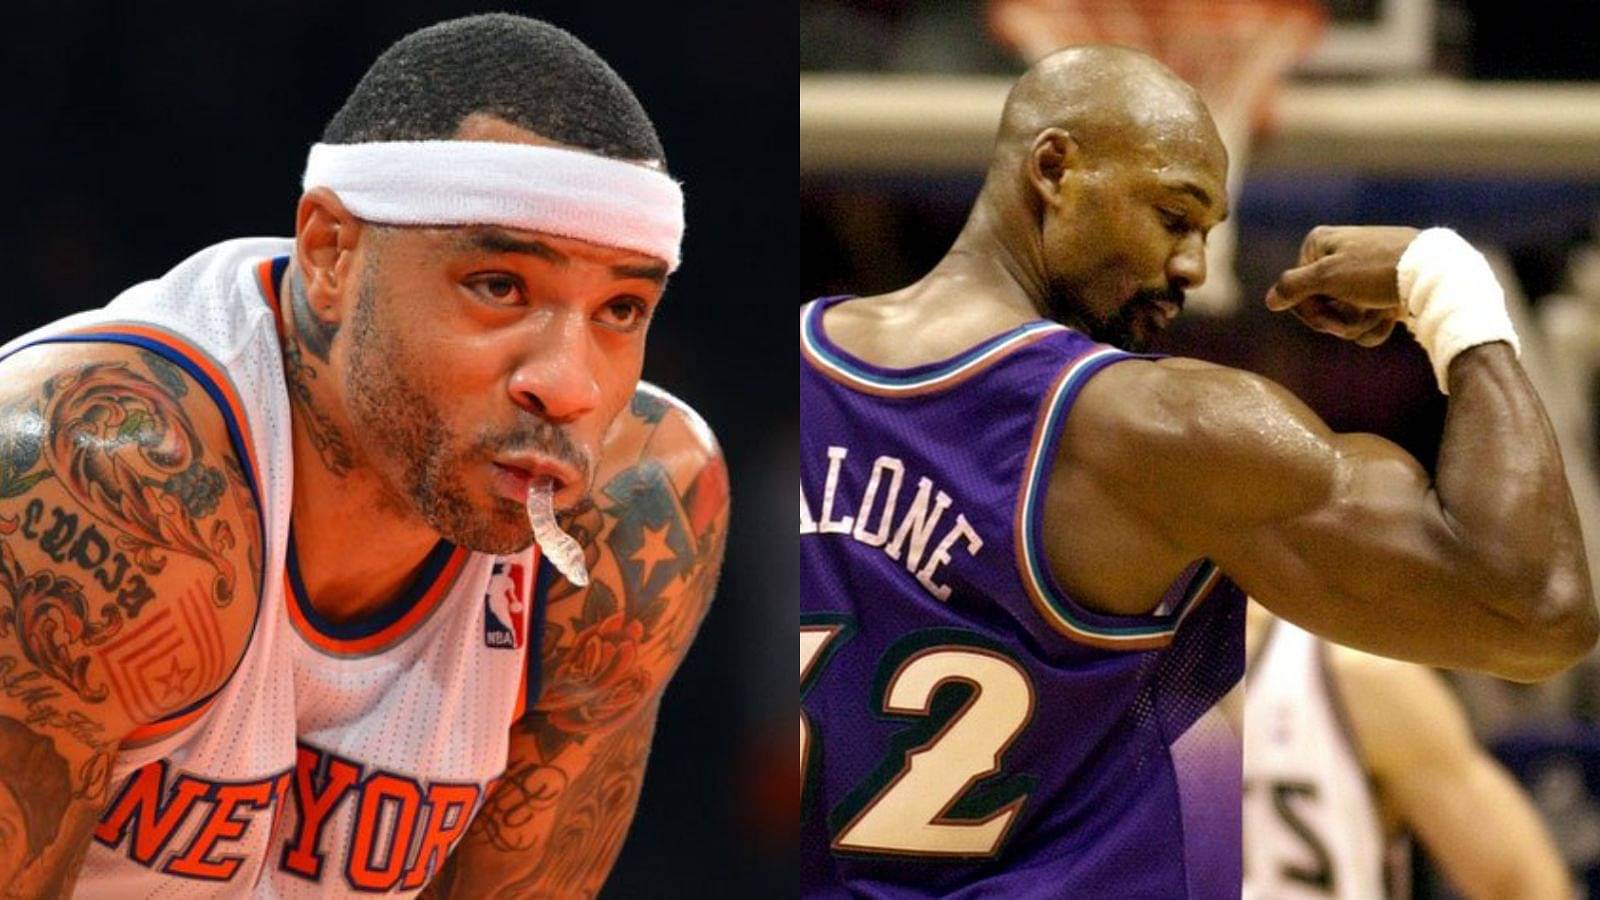 14-year-old Kenyon Martin Decided to Knock Out 6ft 9” Karl Malone to Avenge Isiah Thomas’ 40 stitches, and He Did